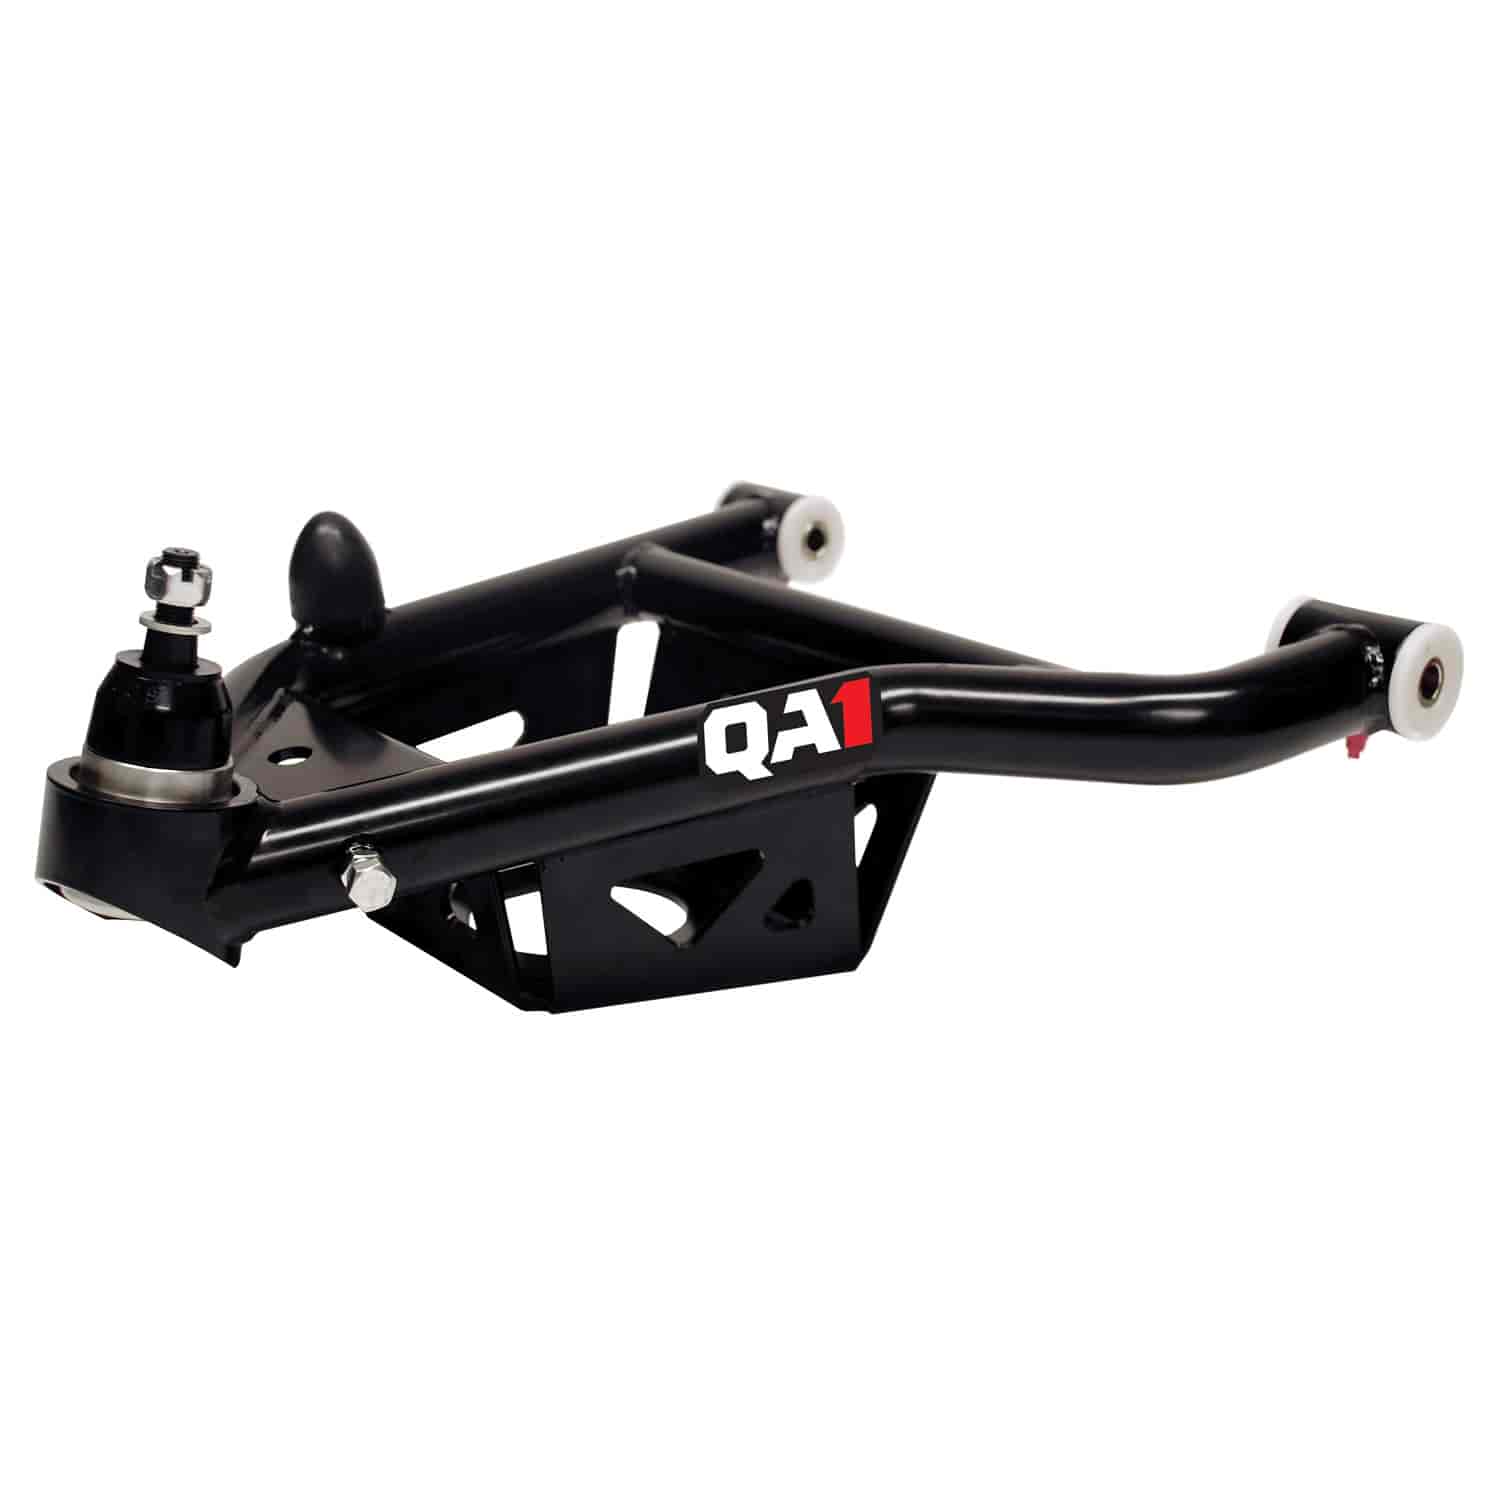 Race Lower Control Arms for 1970-1981 GM-Fody, 1973-1977 GM A-Body and 1975-1979 GM X-Body